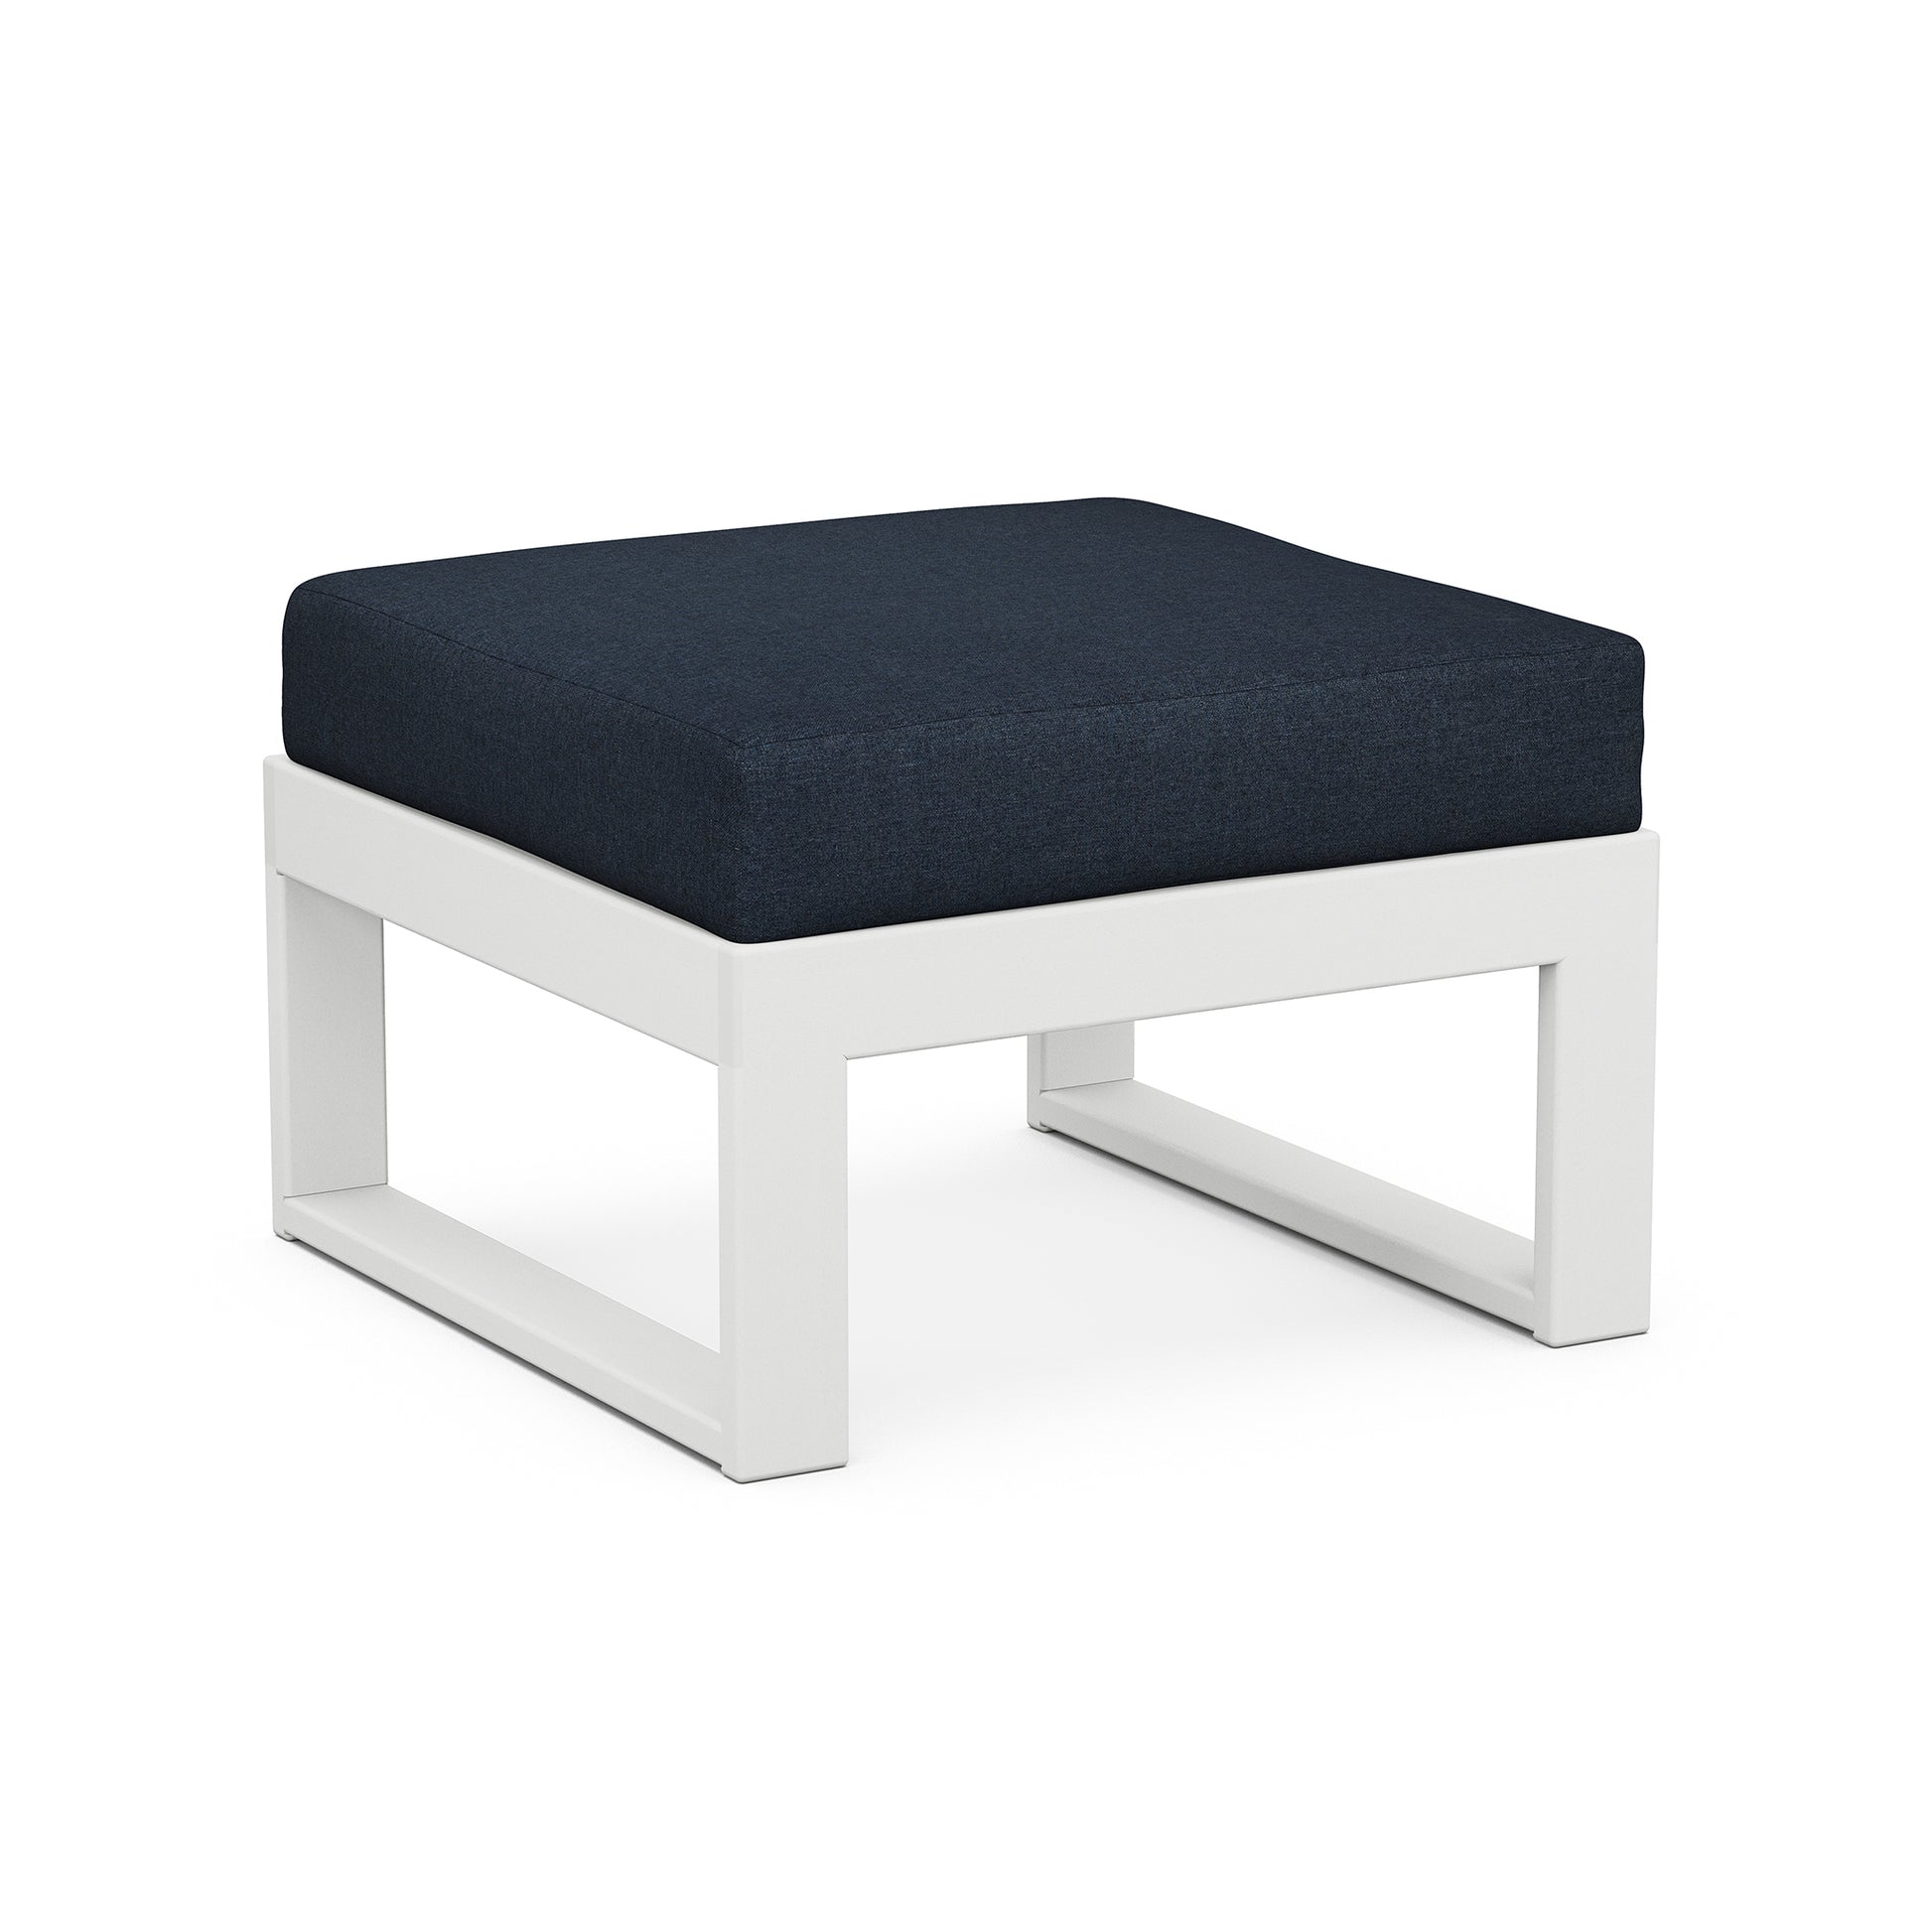 A modern POLYWOOD Modular Ottoman from the EDGE Outdoor Furniture Collection, with a dark blue cushion on a white POLYWOOD® Modular base, isolated on a white background.